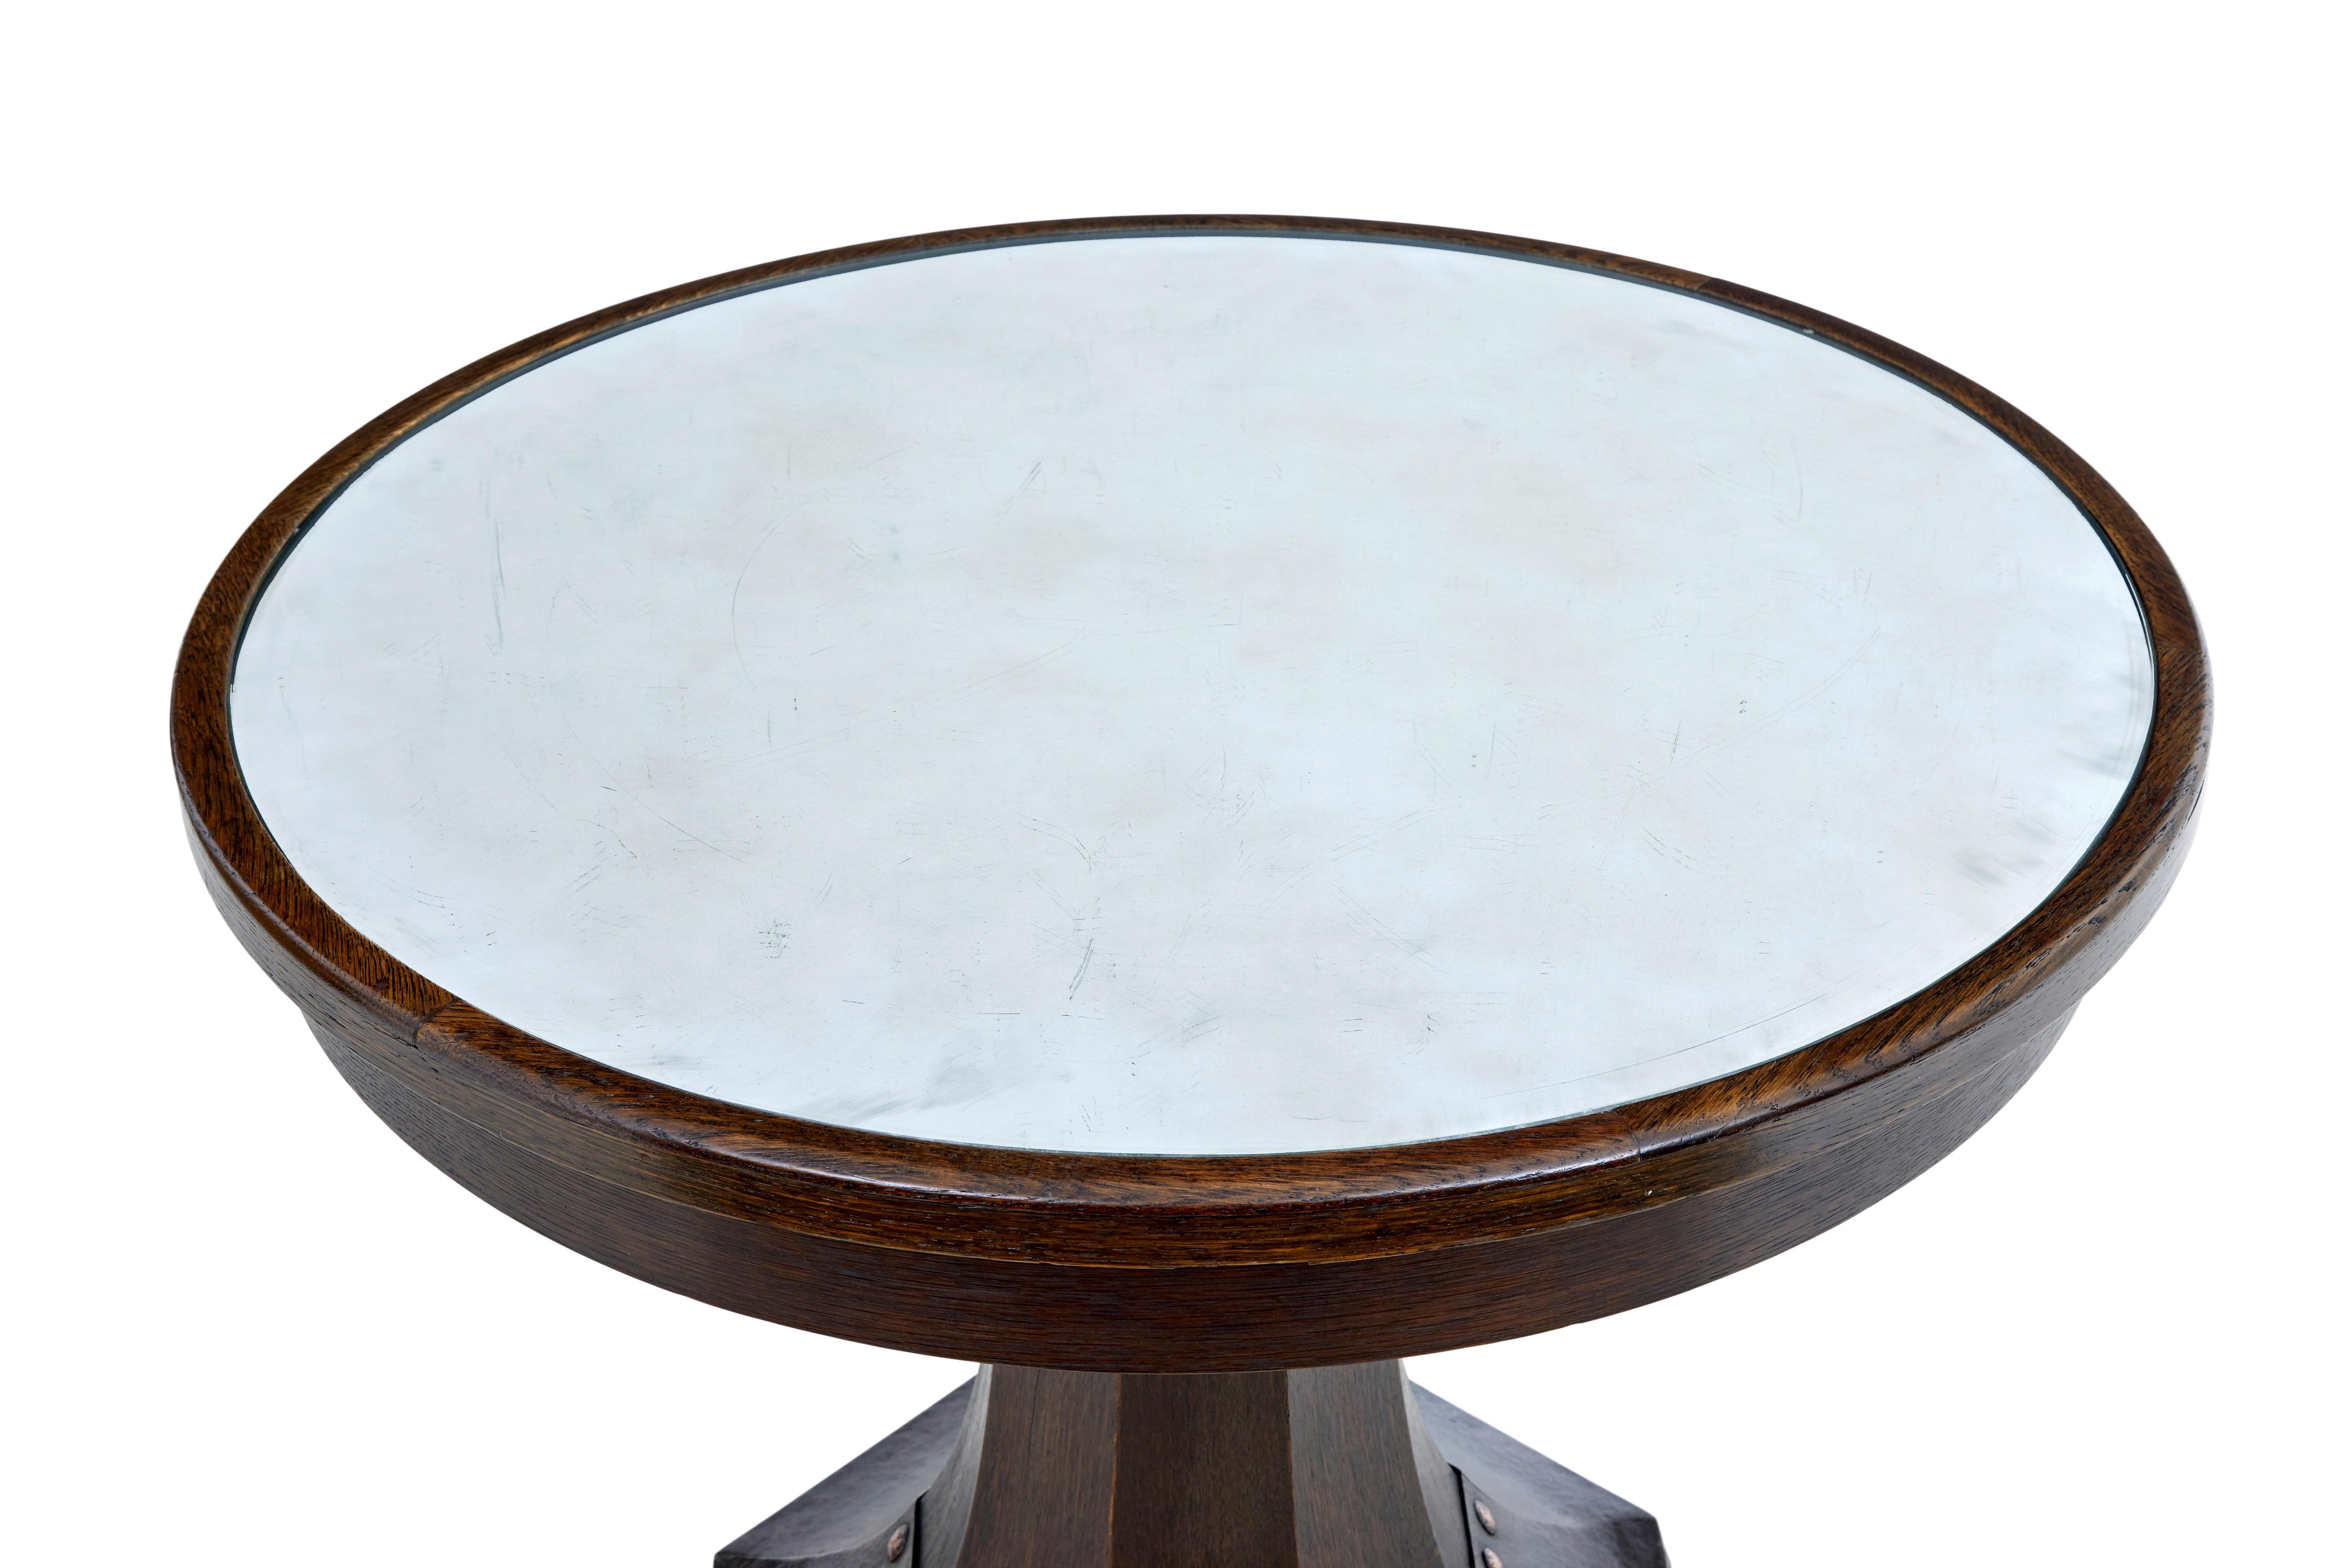 19th century oak and copper aesthetic movement center table circa 1890.

Stickley style pedestal table,  round top with a frosted antique mirror effect on the underside of the glass, with a oak bordered edge.  Octagonal fluted pedestal encased with